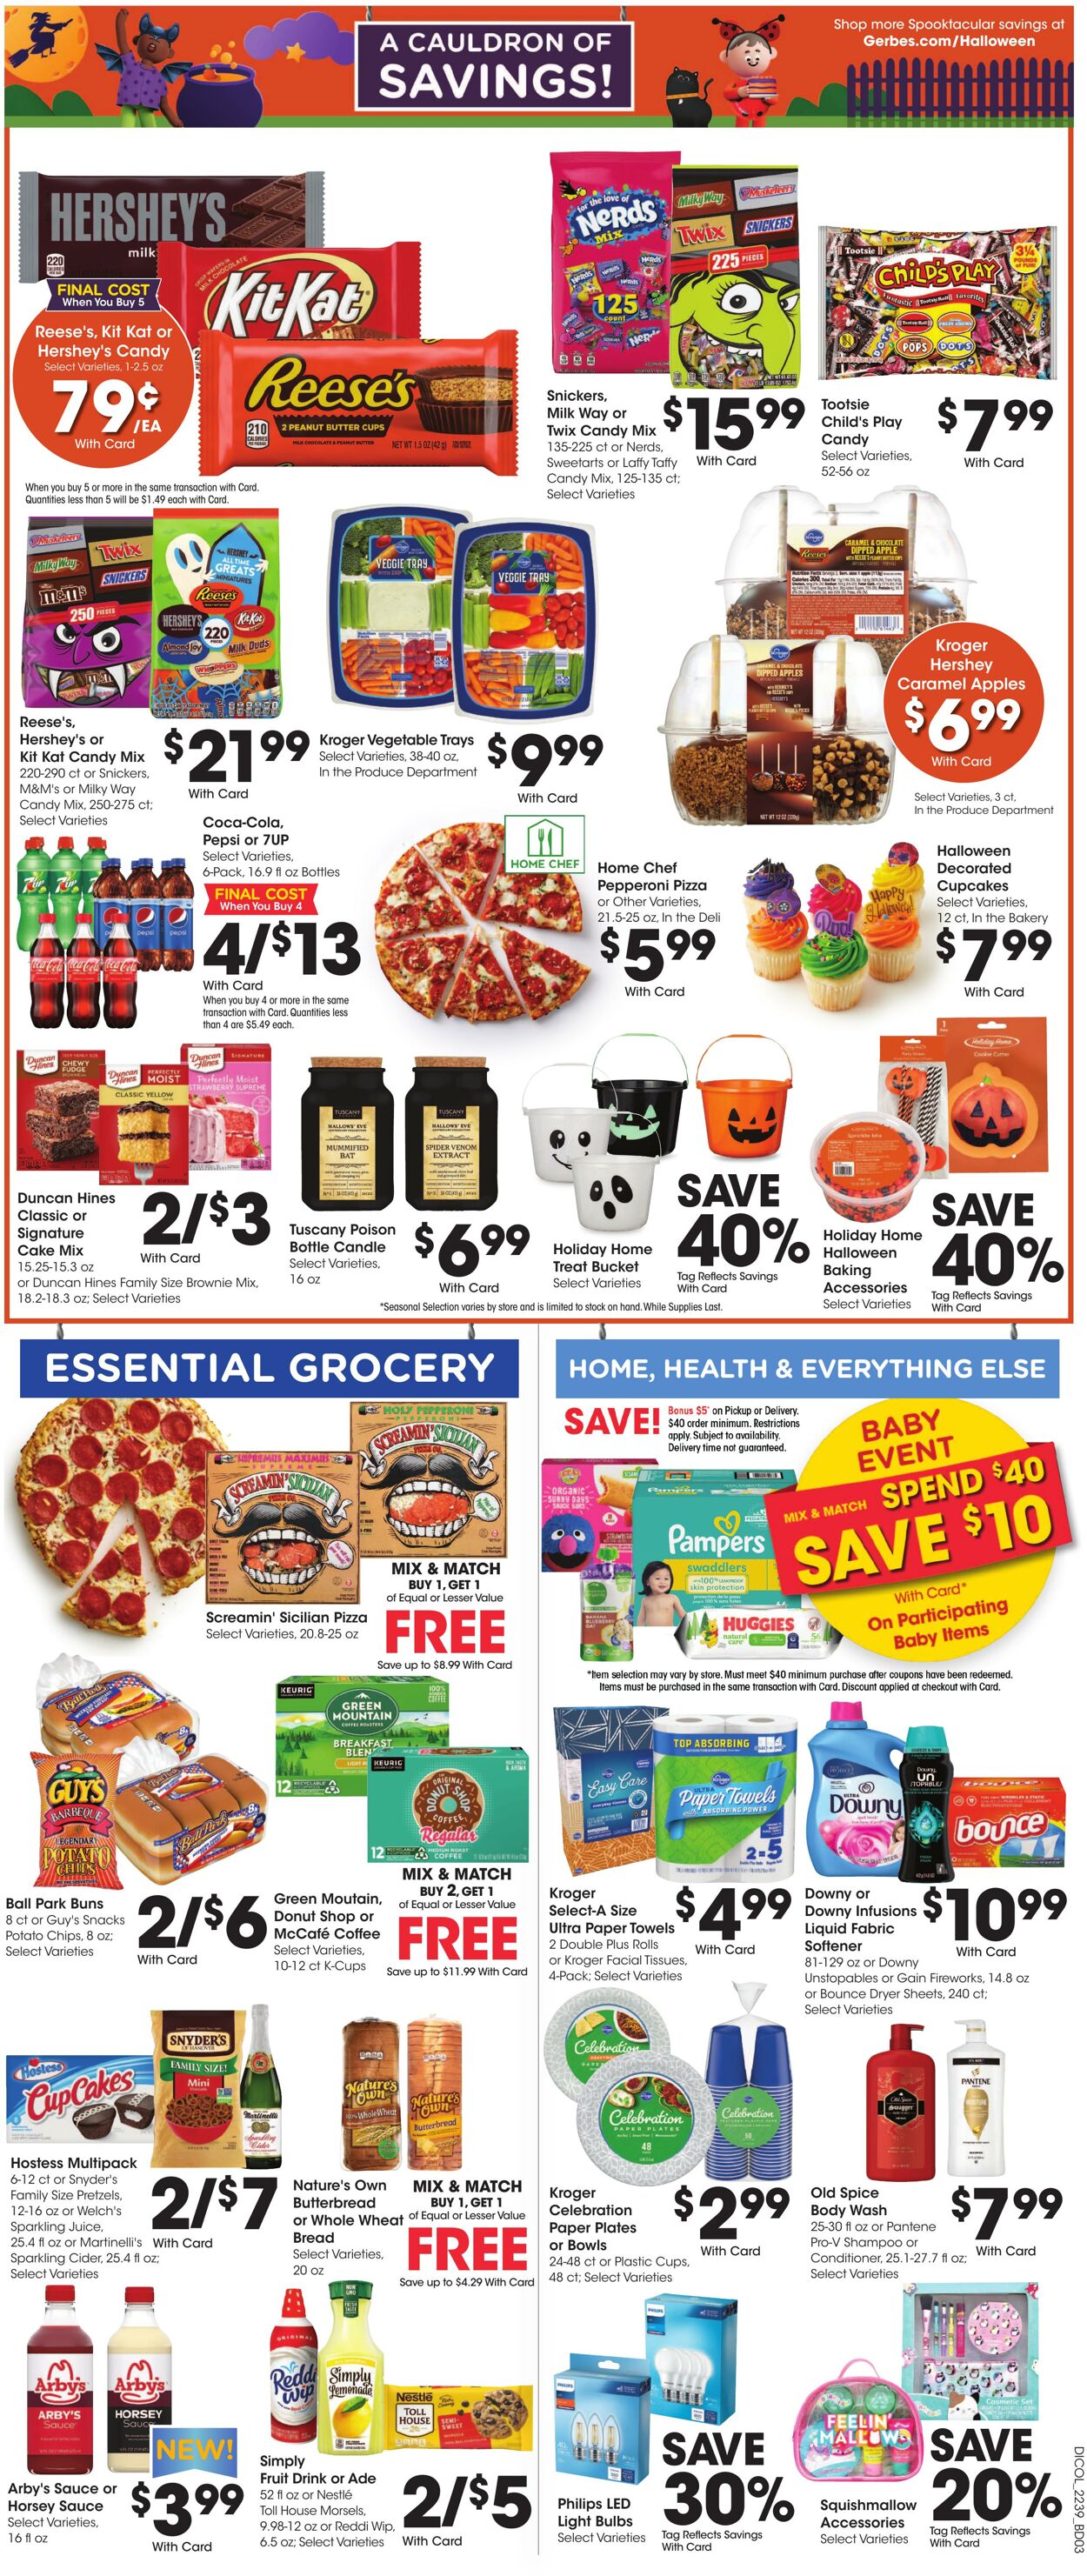 Weekly ad Gerbes Supermarkets 10/26/2022 - 11/01/2022